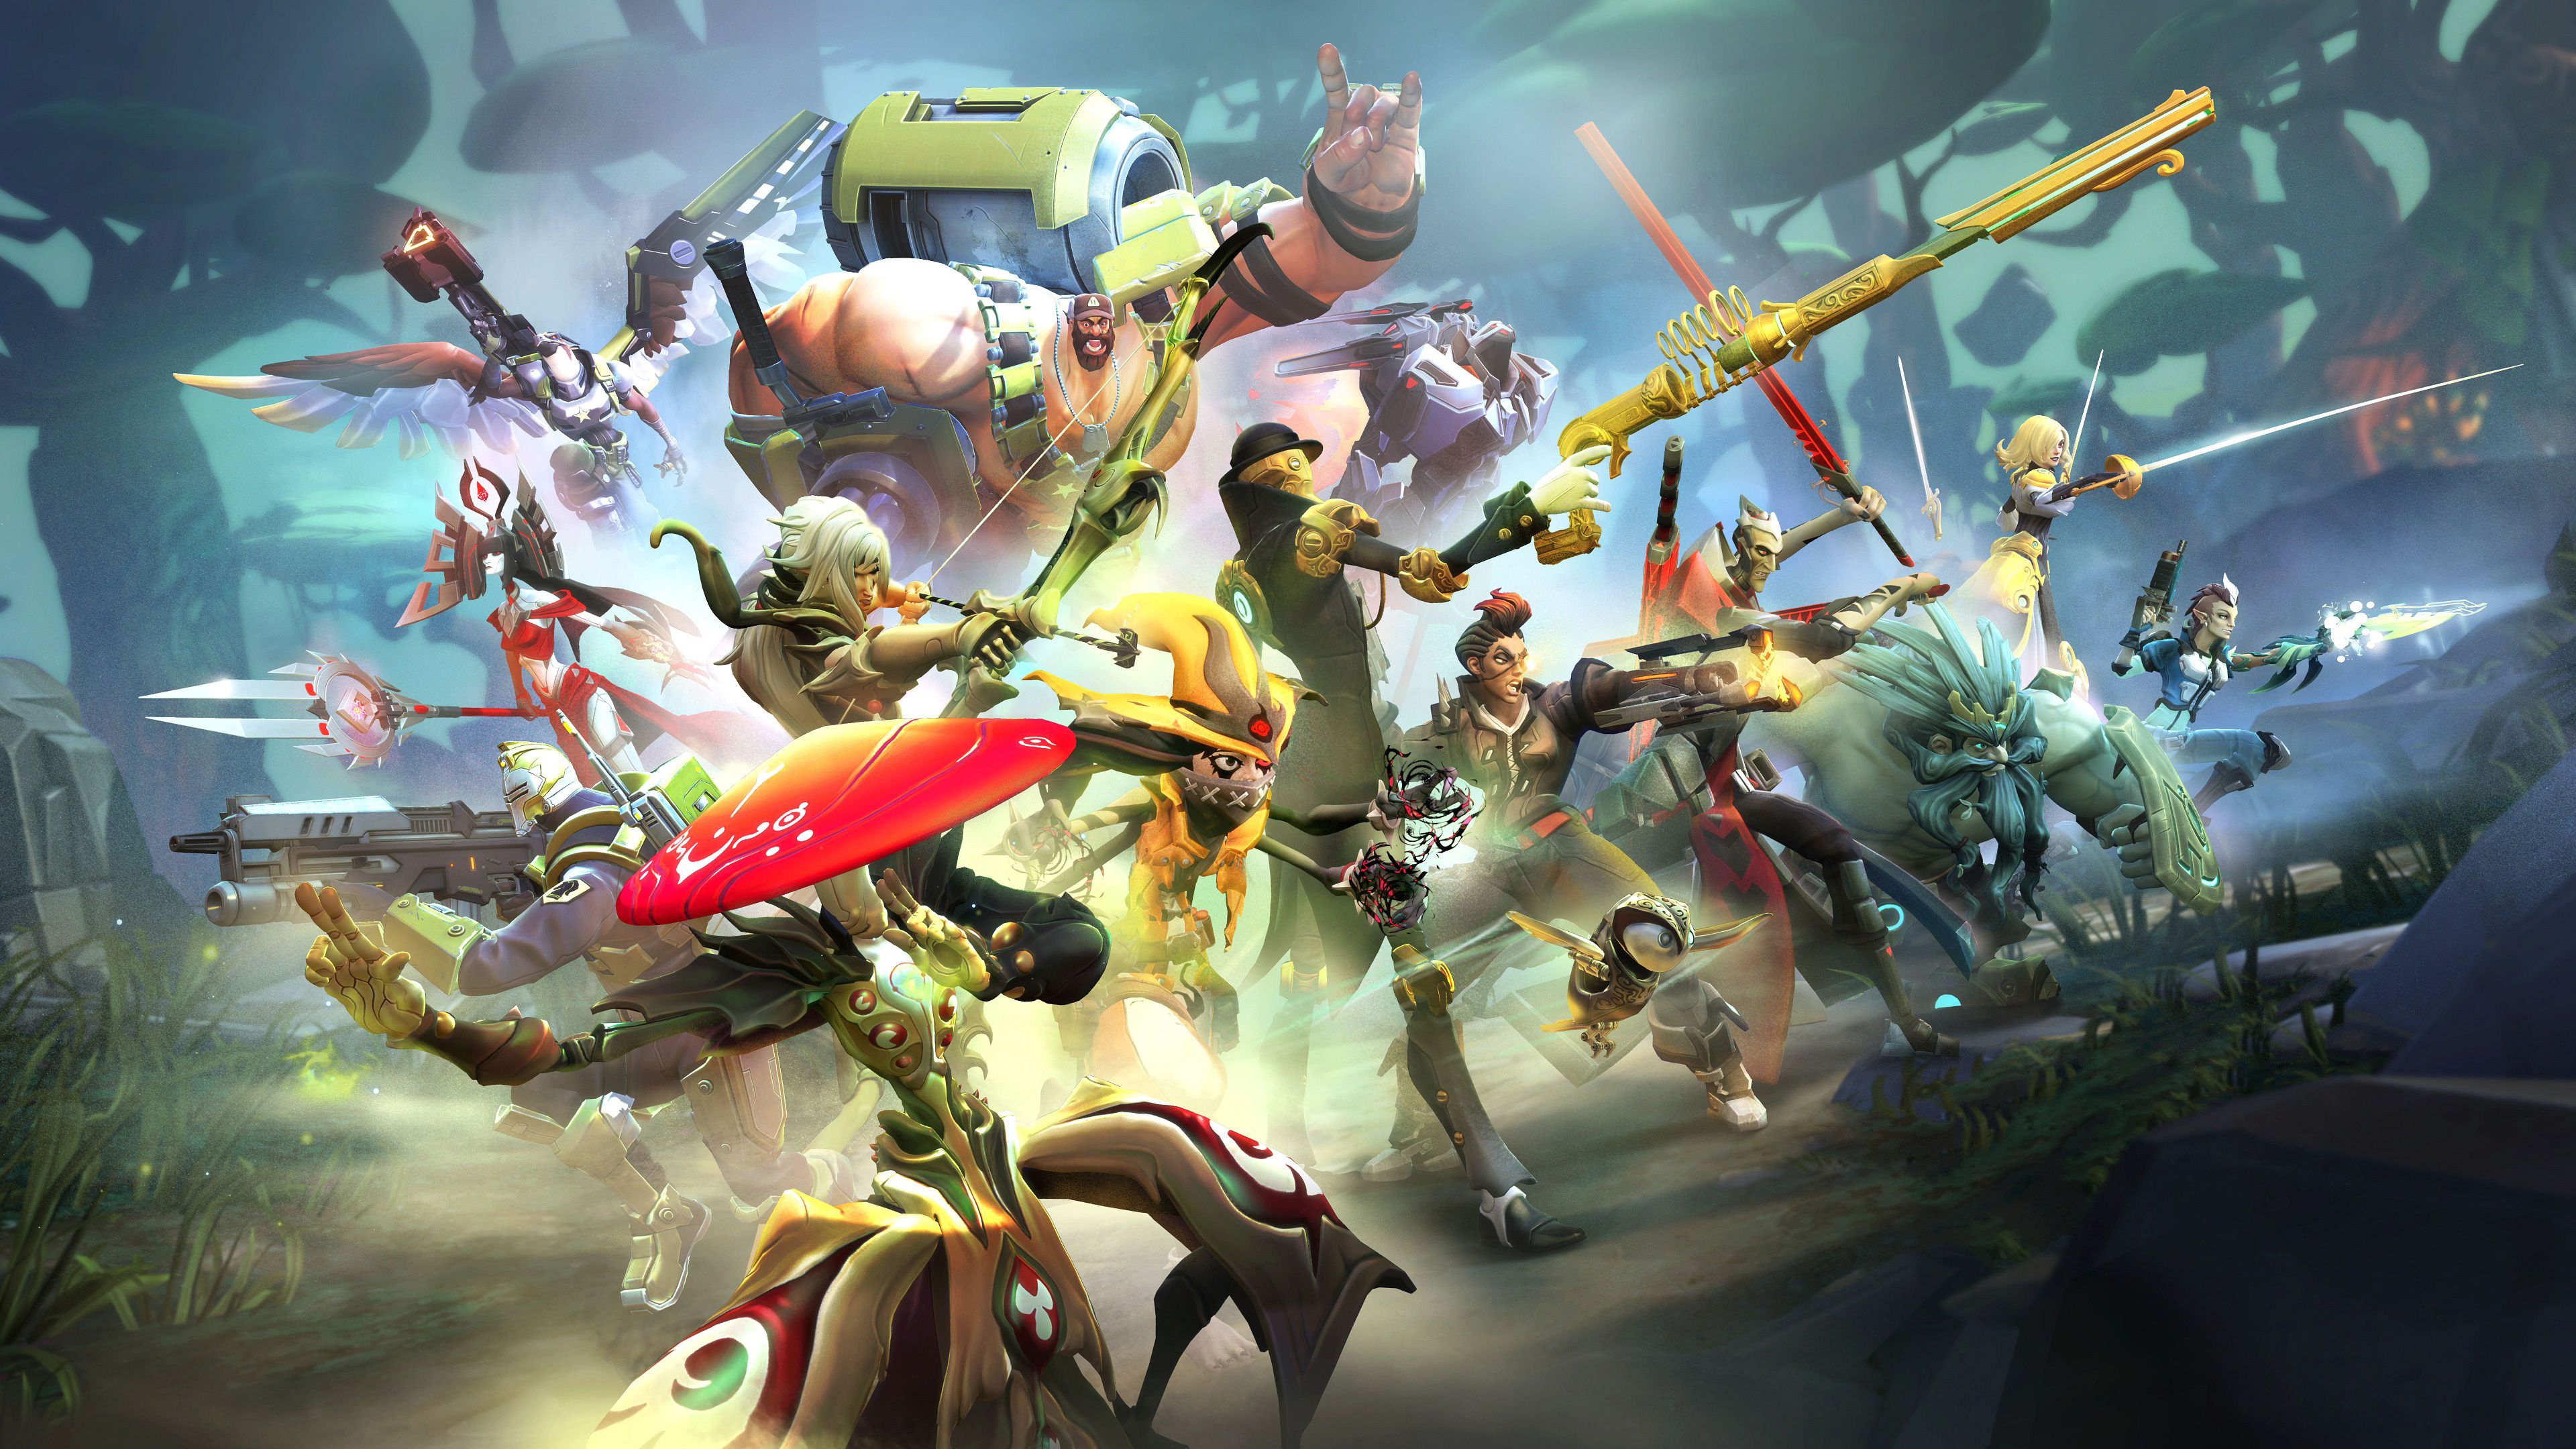 Battle battleborn hd games k wallpapers images backgrounds photos and pictures